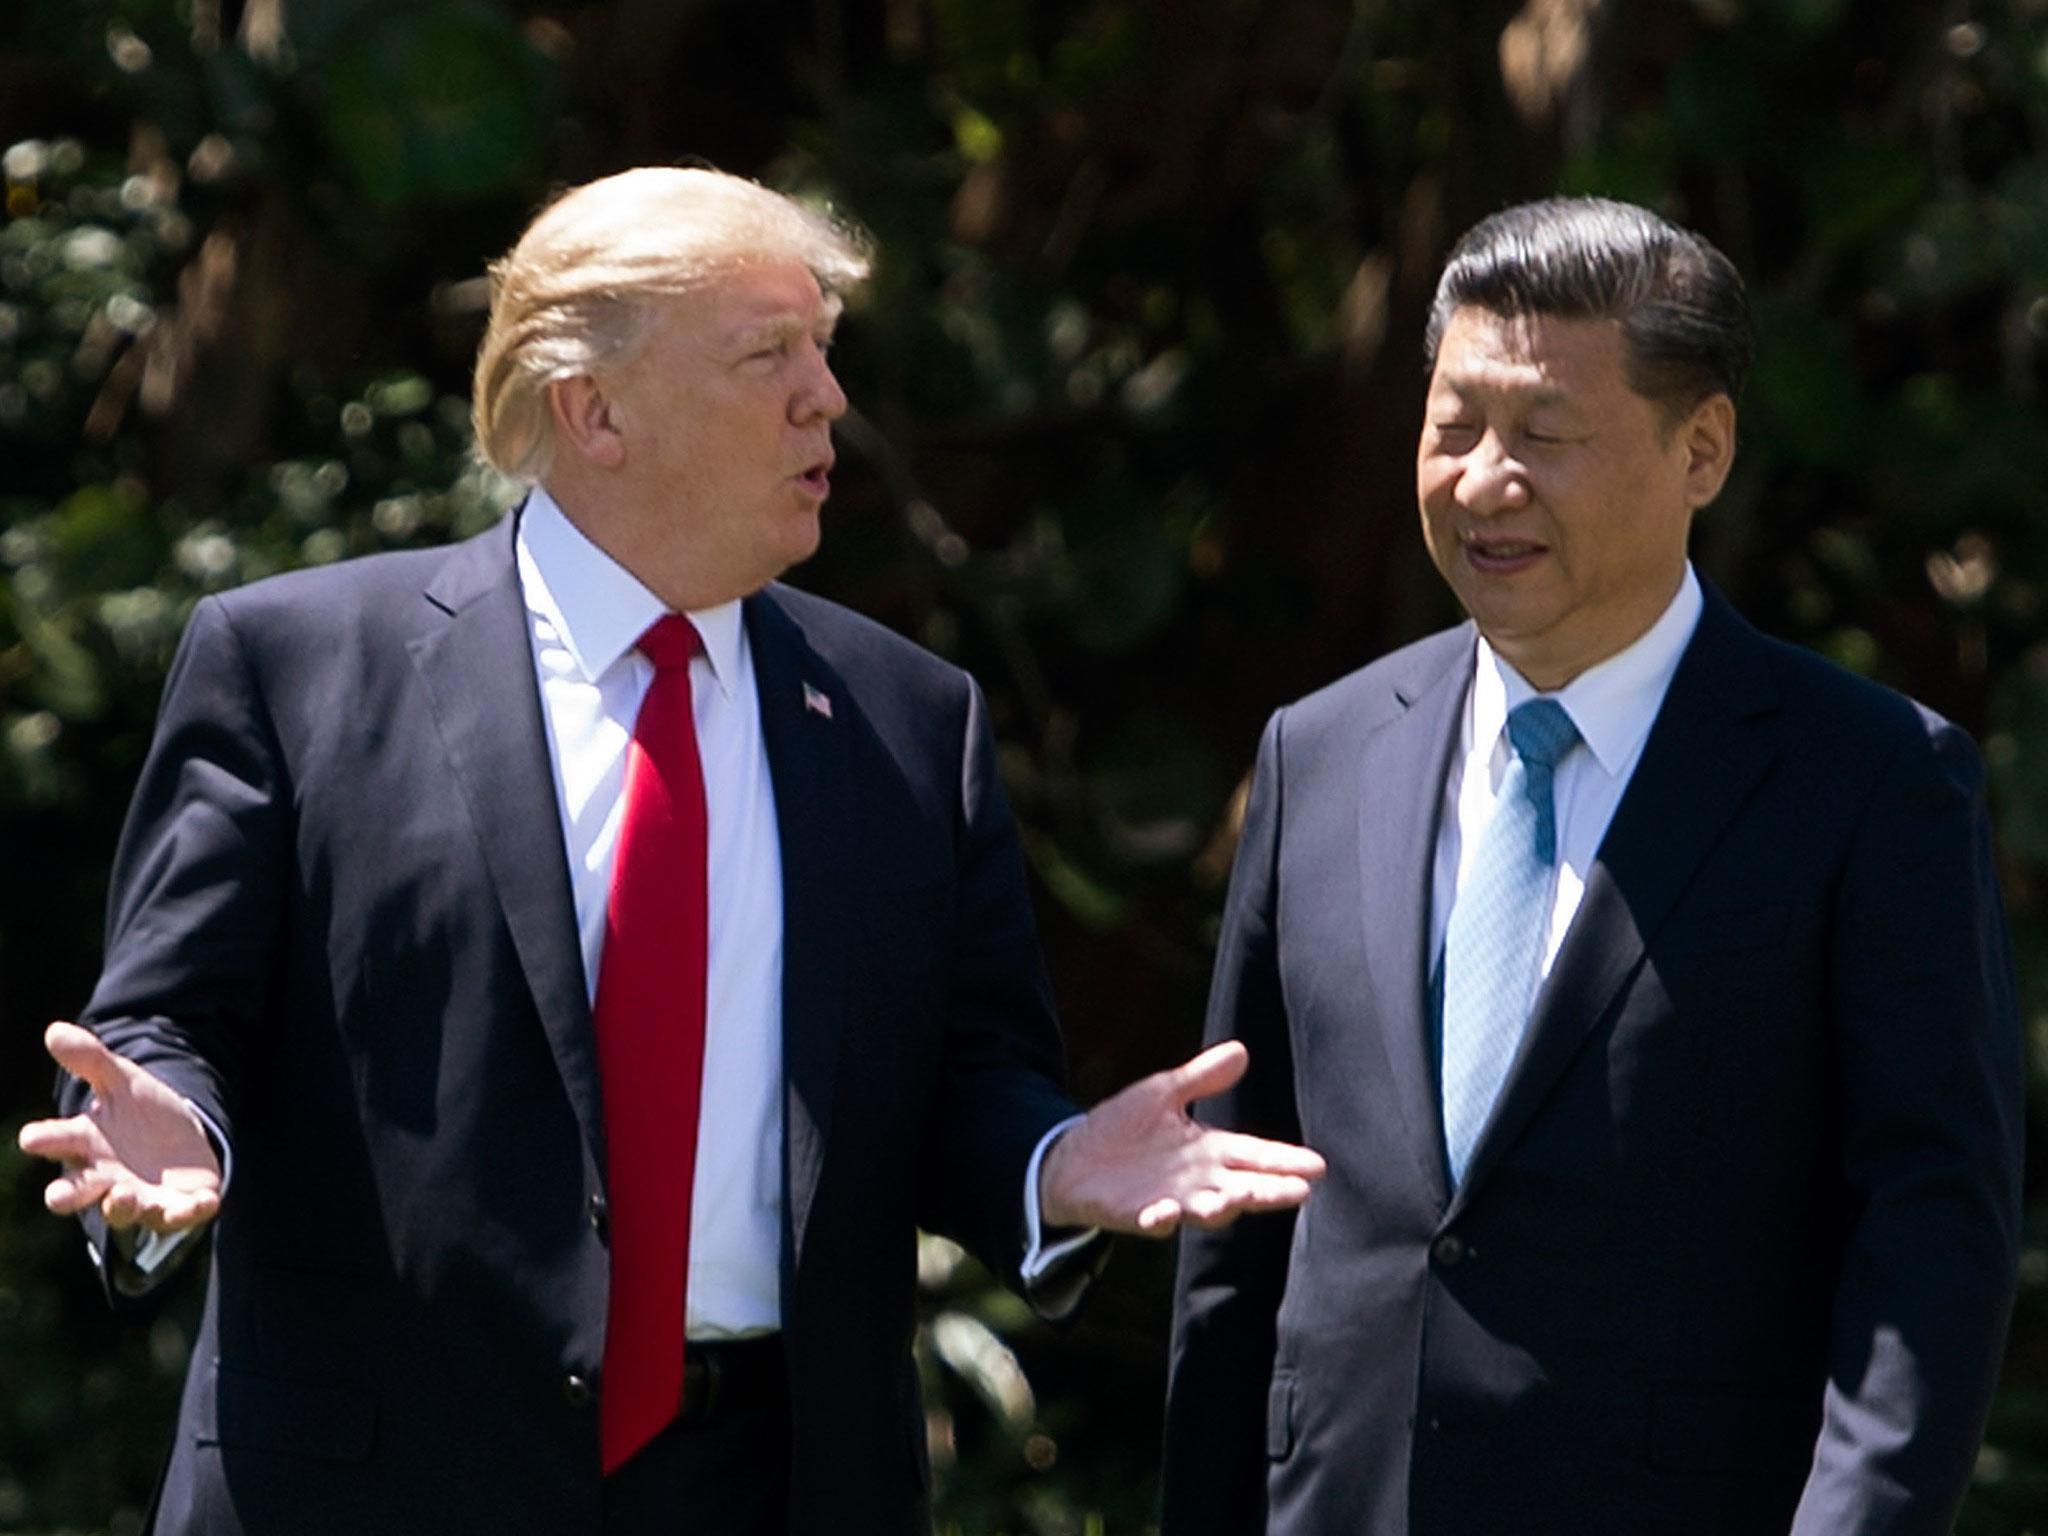 Donald Trump said in an interview that Korea "used to be part of China" following his meeting with Chinese President Xi Jingping